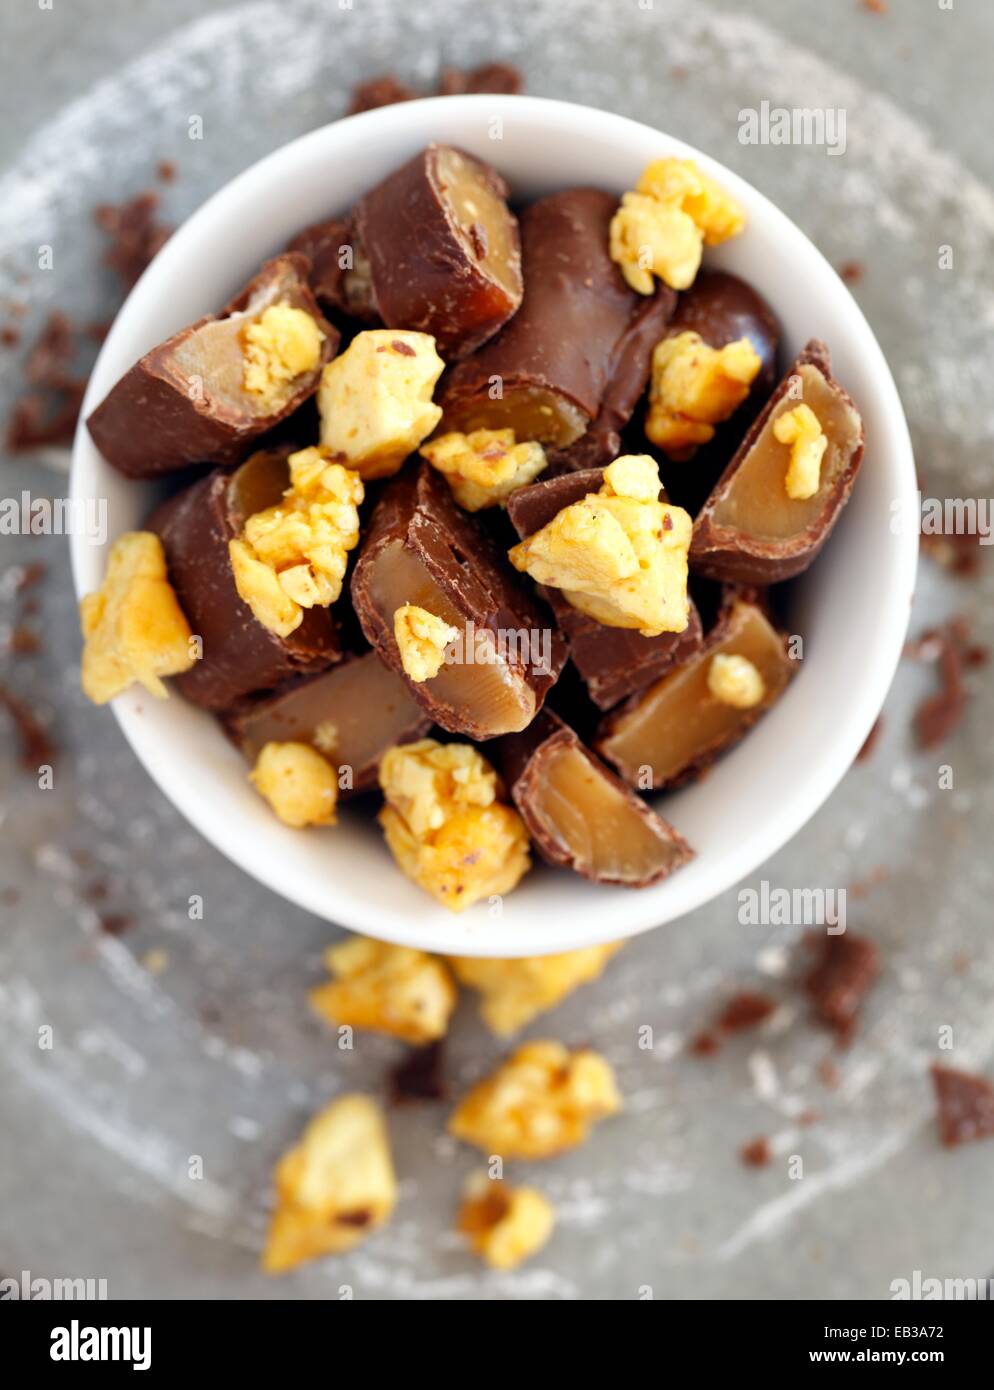 Chocolate candy bars cut into pieces mixed with honeycomb in white porcelain bowl Stock Photo